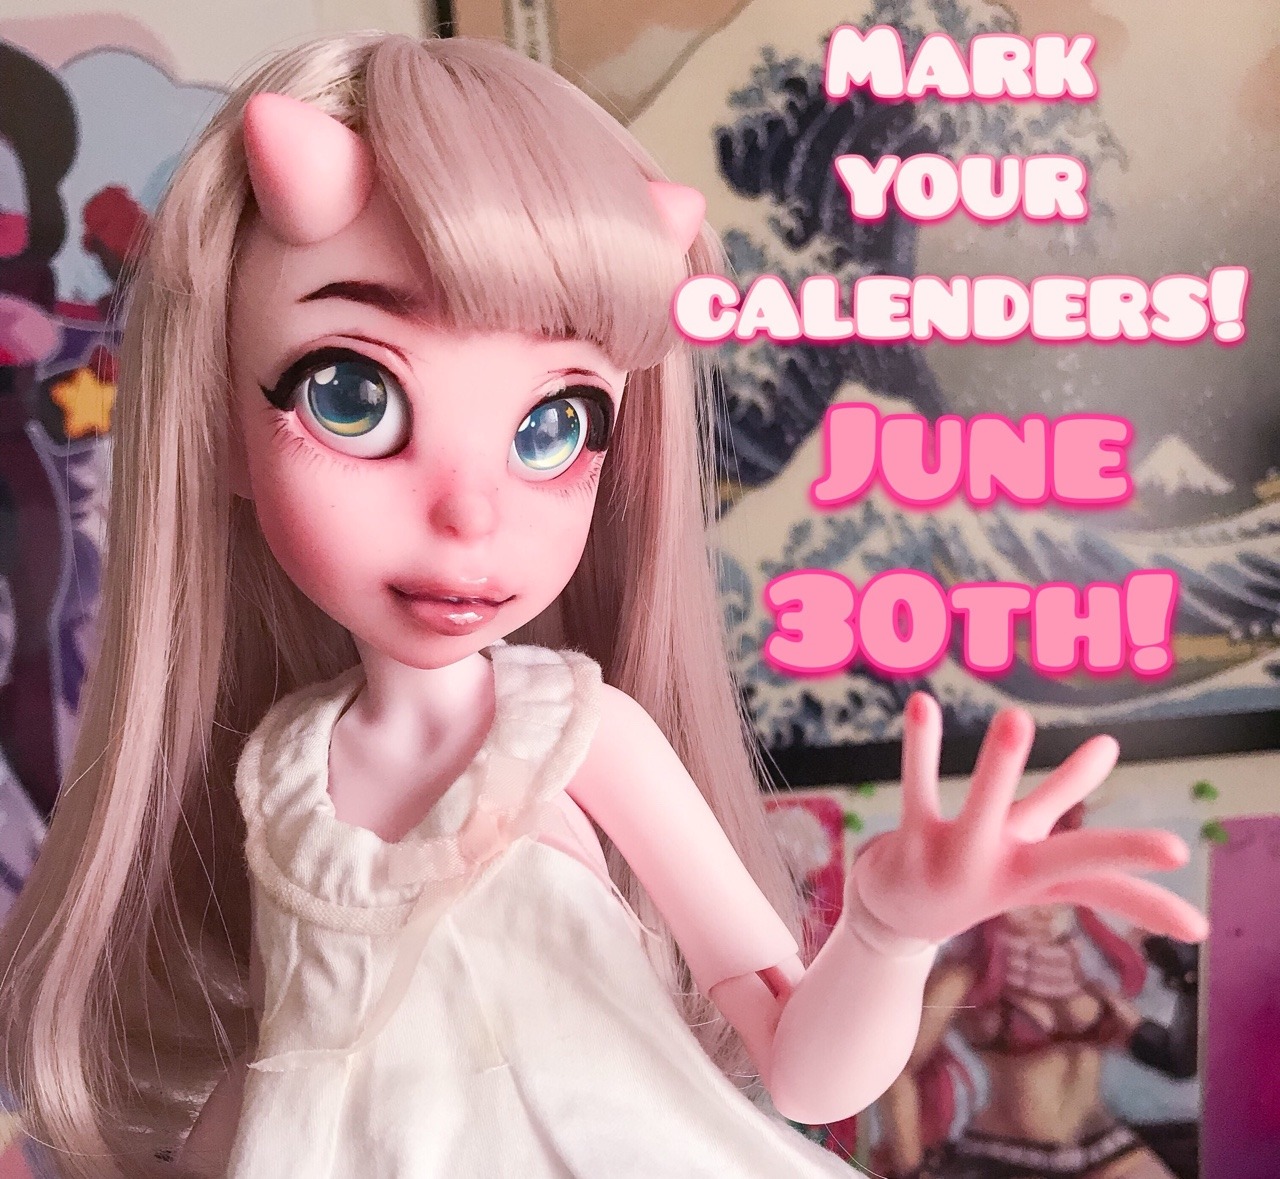 Danniâ€™s pre-order now has an official date coming up! Iâ€™ve set the date for Saturday June, 30th 2018 at 3pm EST!
Iâ€™m only doing 40 dolls this first preorder for White Peach (NS), Almond (Tan), and Strawberry Cream (pink resin). Danni will be offered...